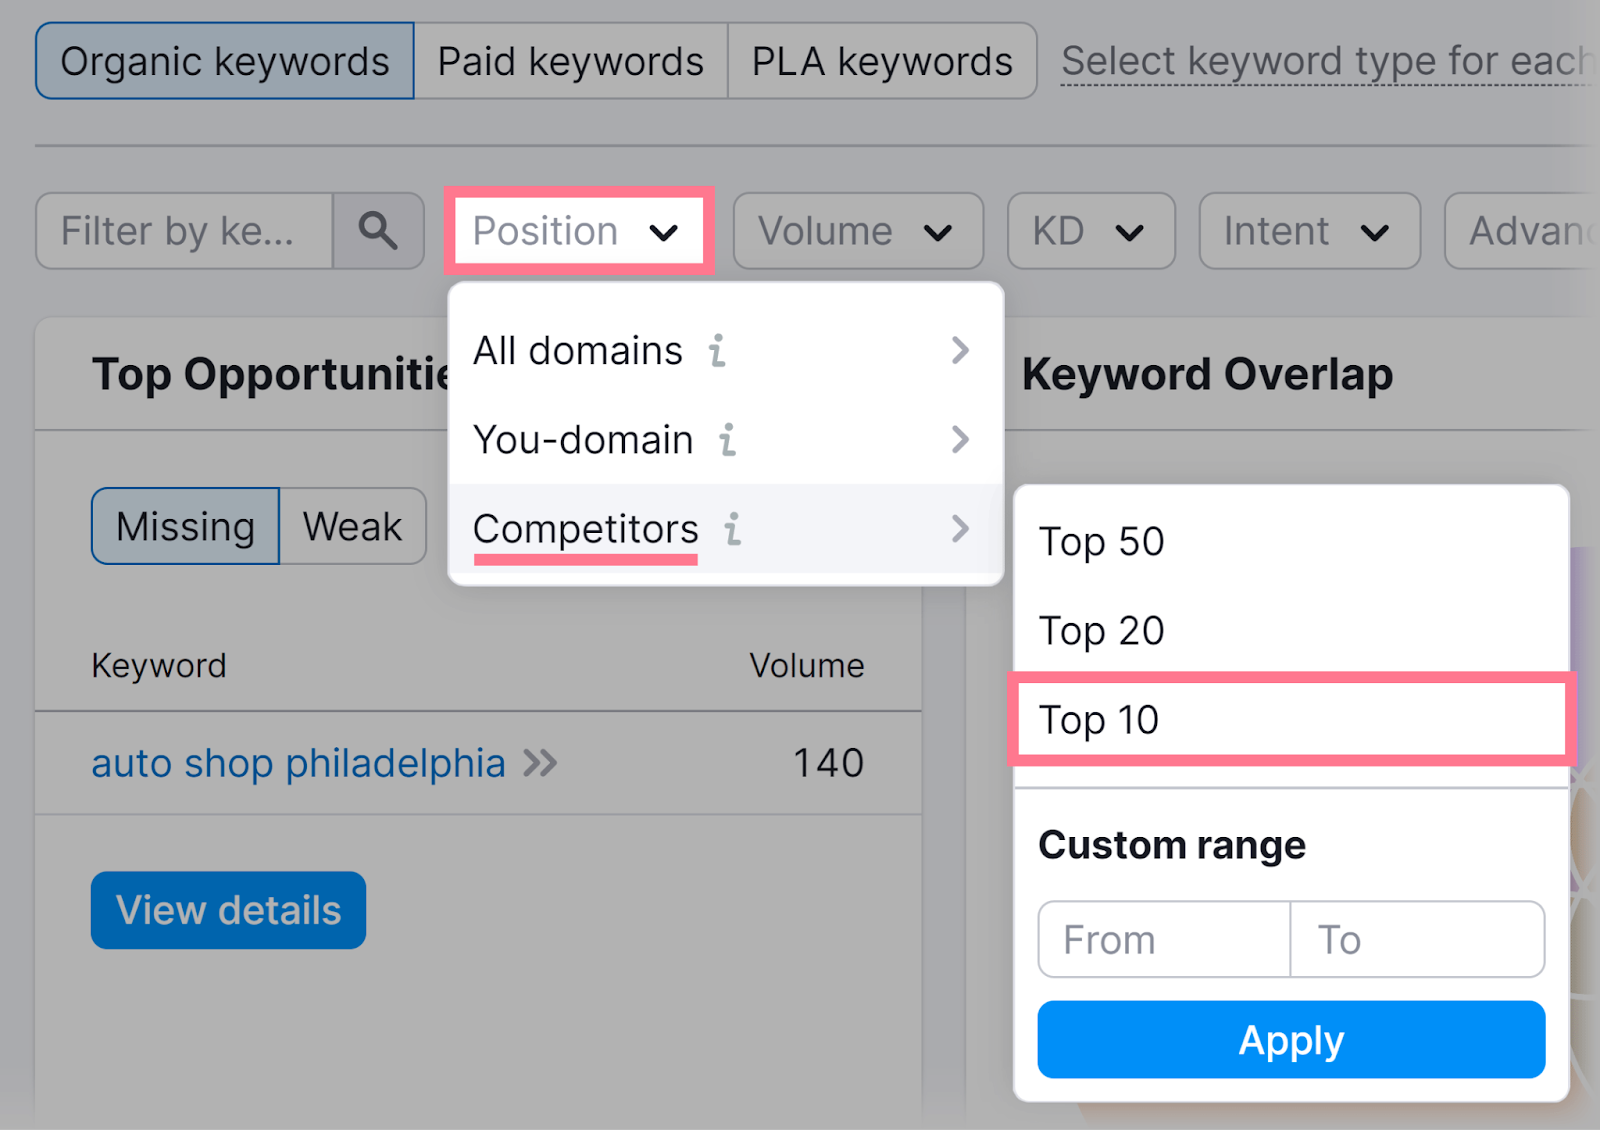 apply "top 10" filter to find your rivals’ most relevant keywords